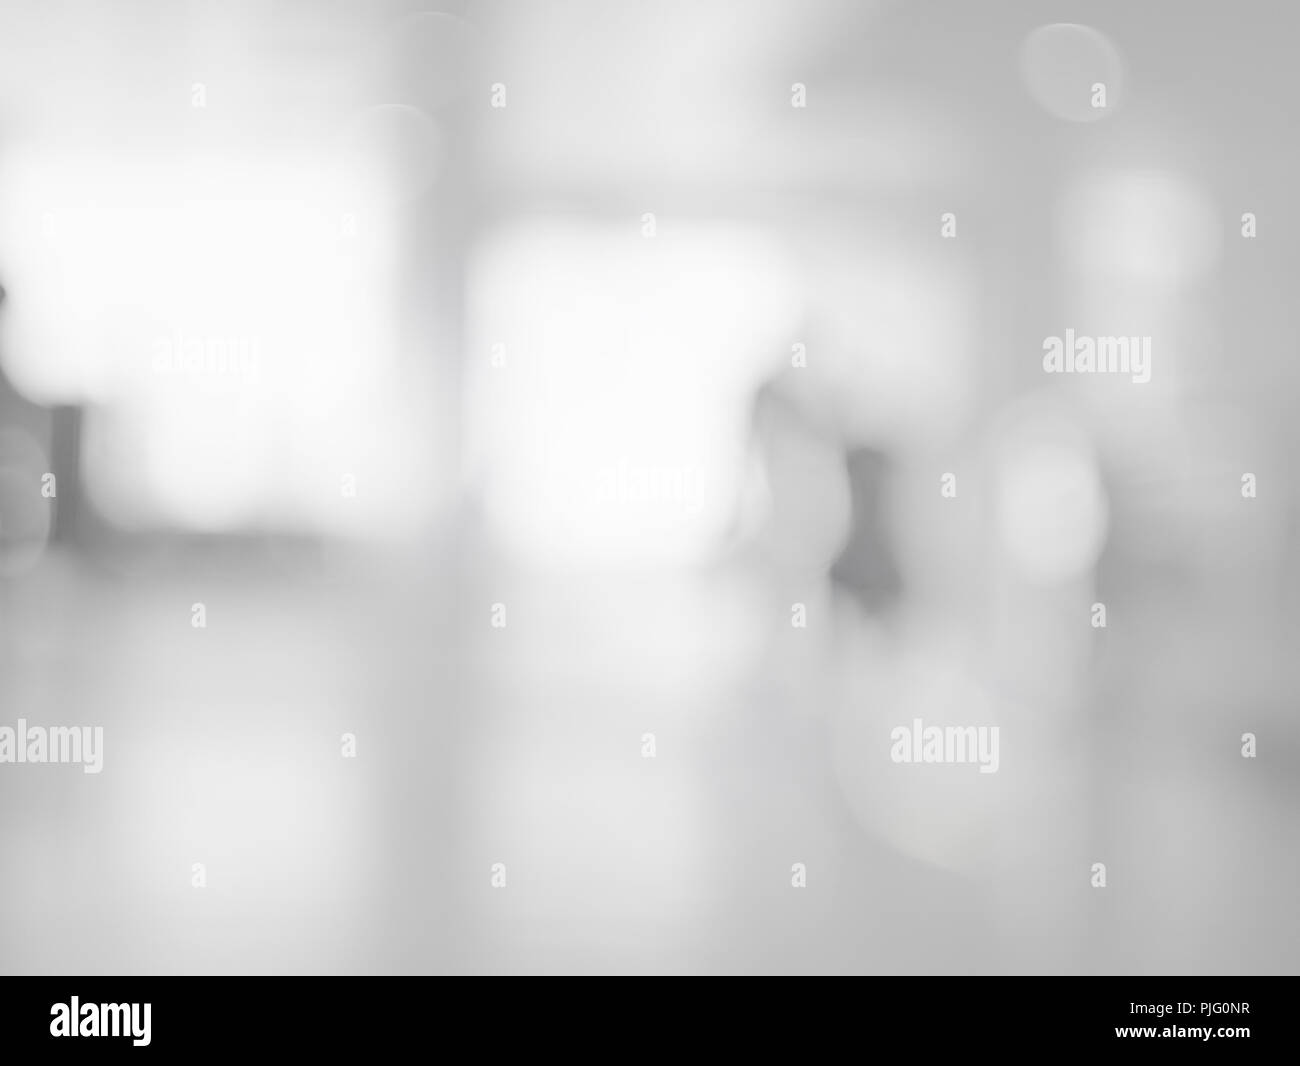 Blurred pathway Abstract white grey background for backdrop design, composition for , website, magazine or graphic for commercial campaign design Stock Photo